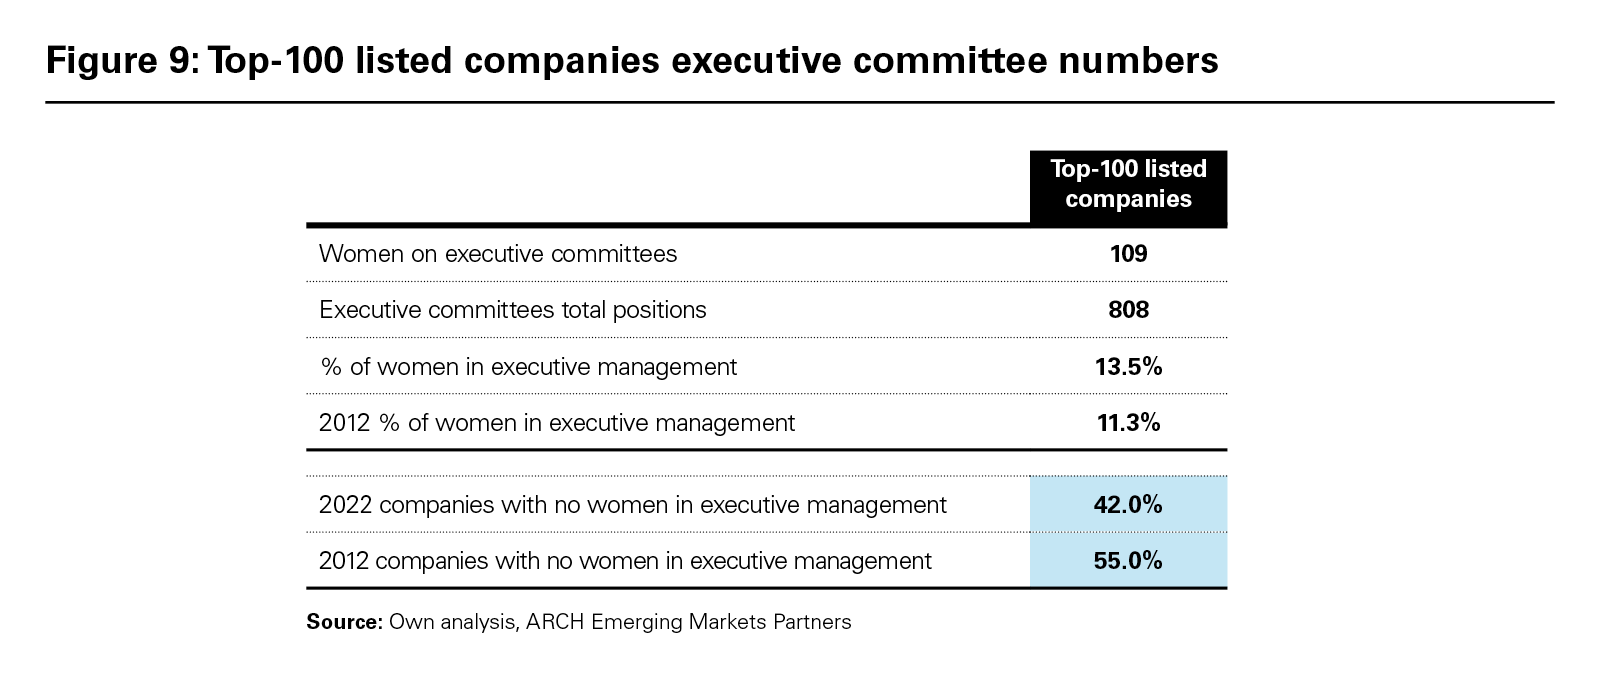 Figure 9: Top-100 listed companies executive committee numbers